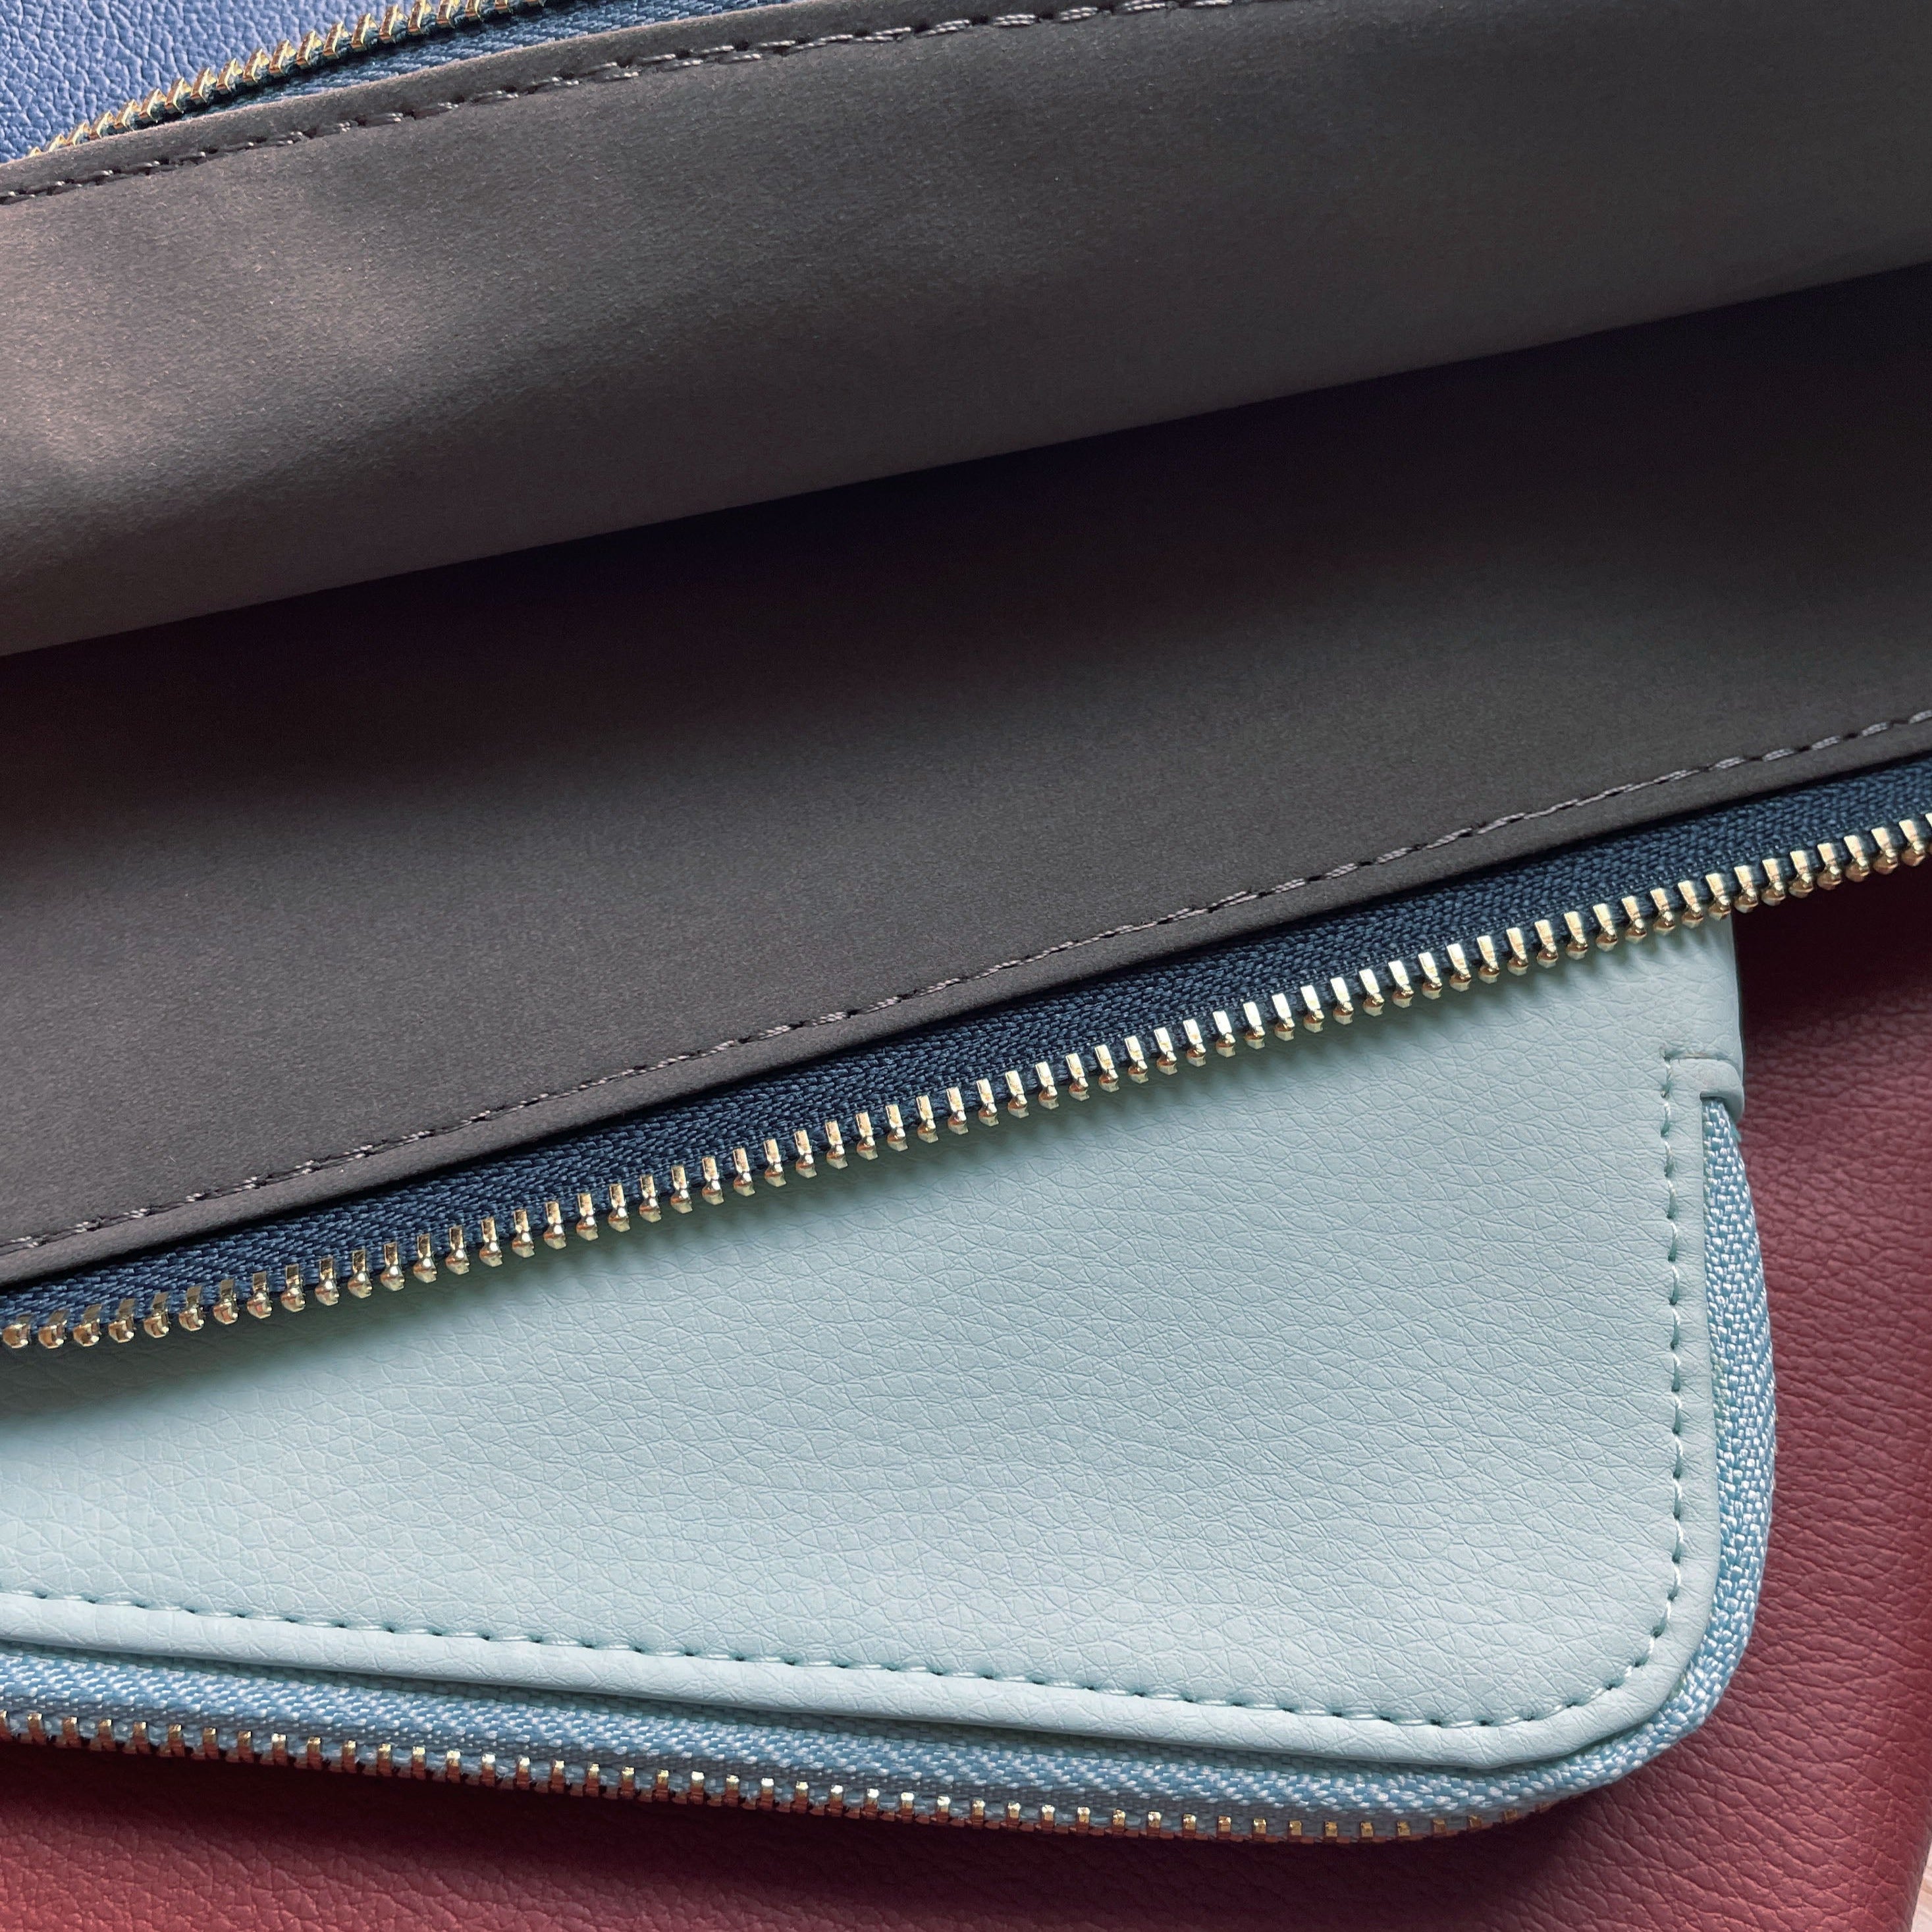 Tablet sleeve with YKK zipper closure and Suede liner